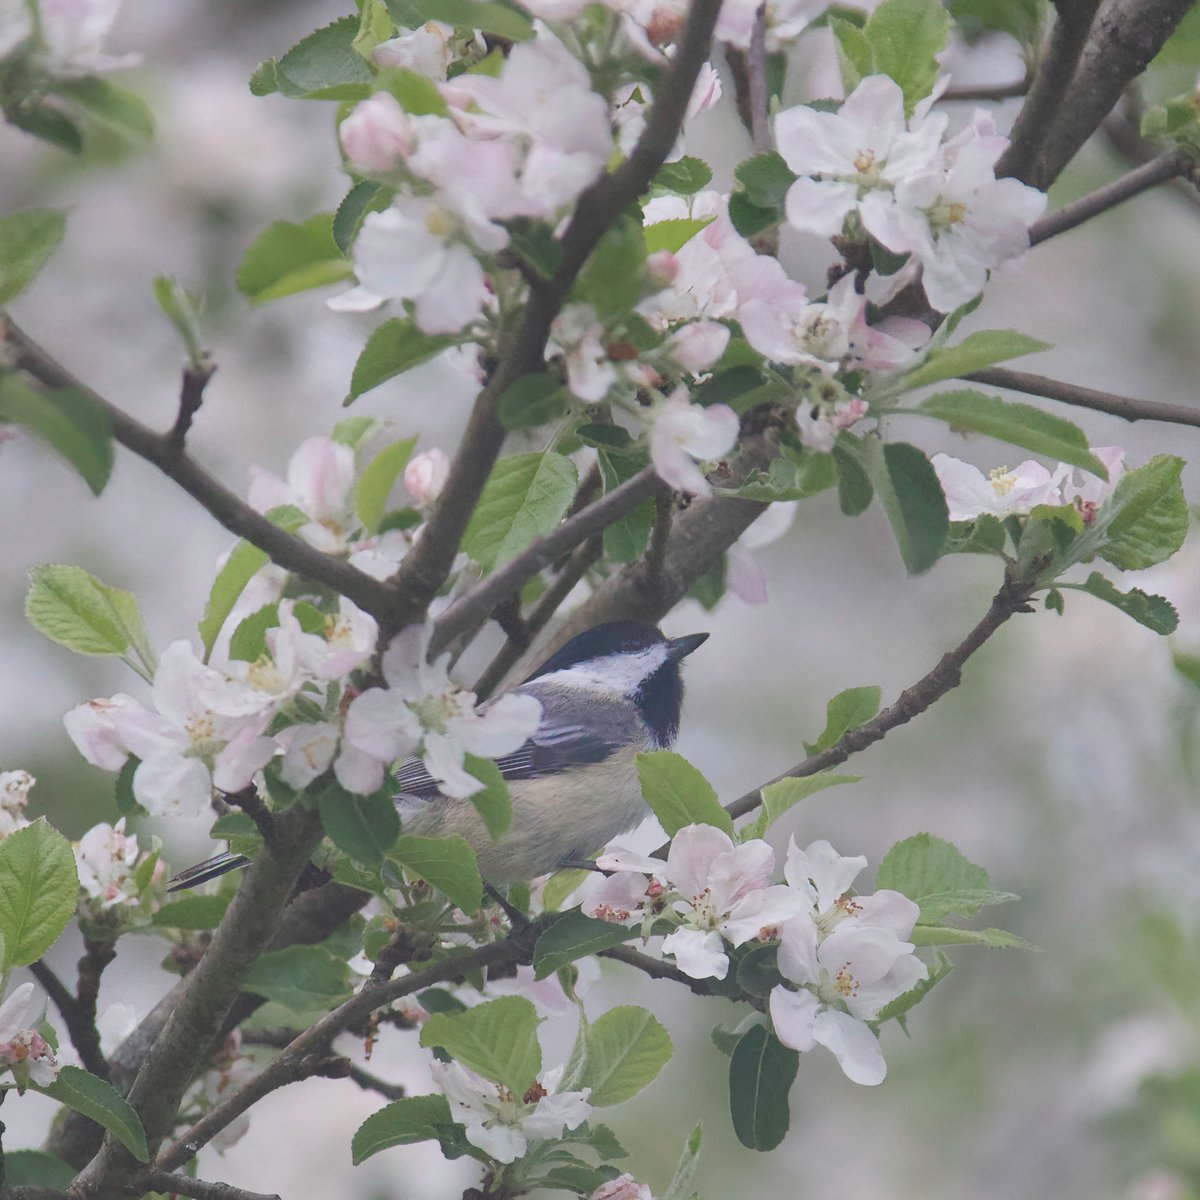 Even 'common' #birds look special surrounded by #AppleBlossoms!

#BirdWatching #Sparrow #HouseSparrow #Chickadee #TrumbullCT